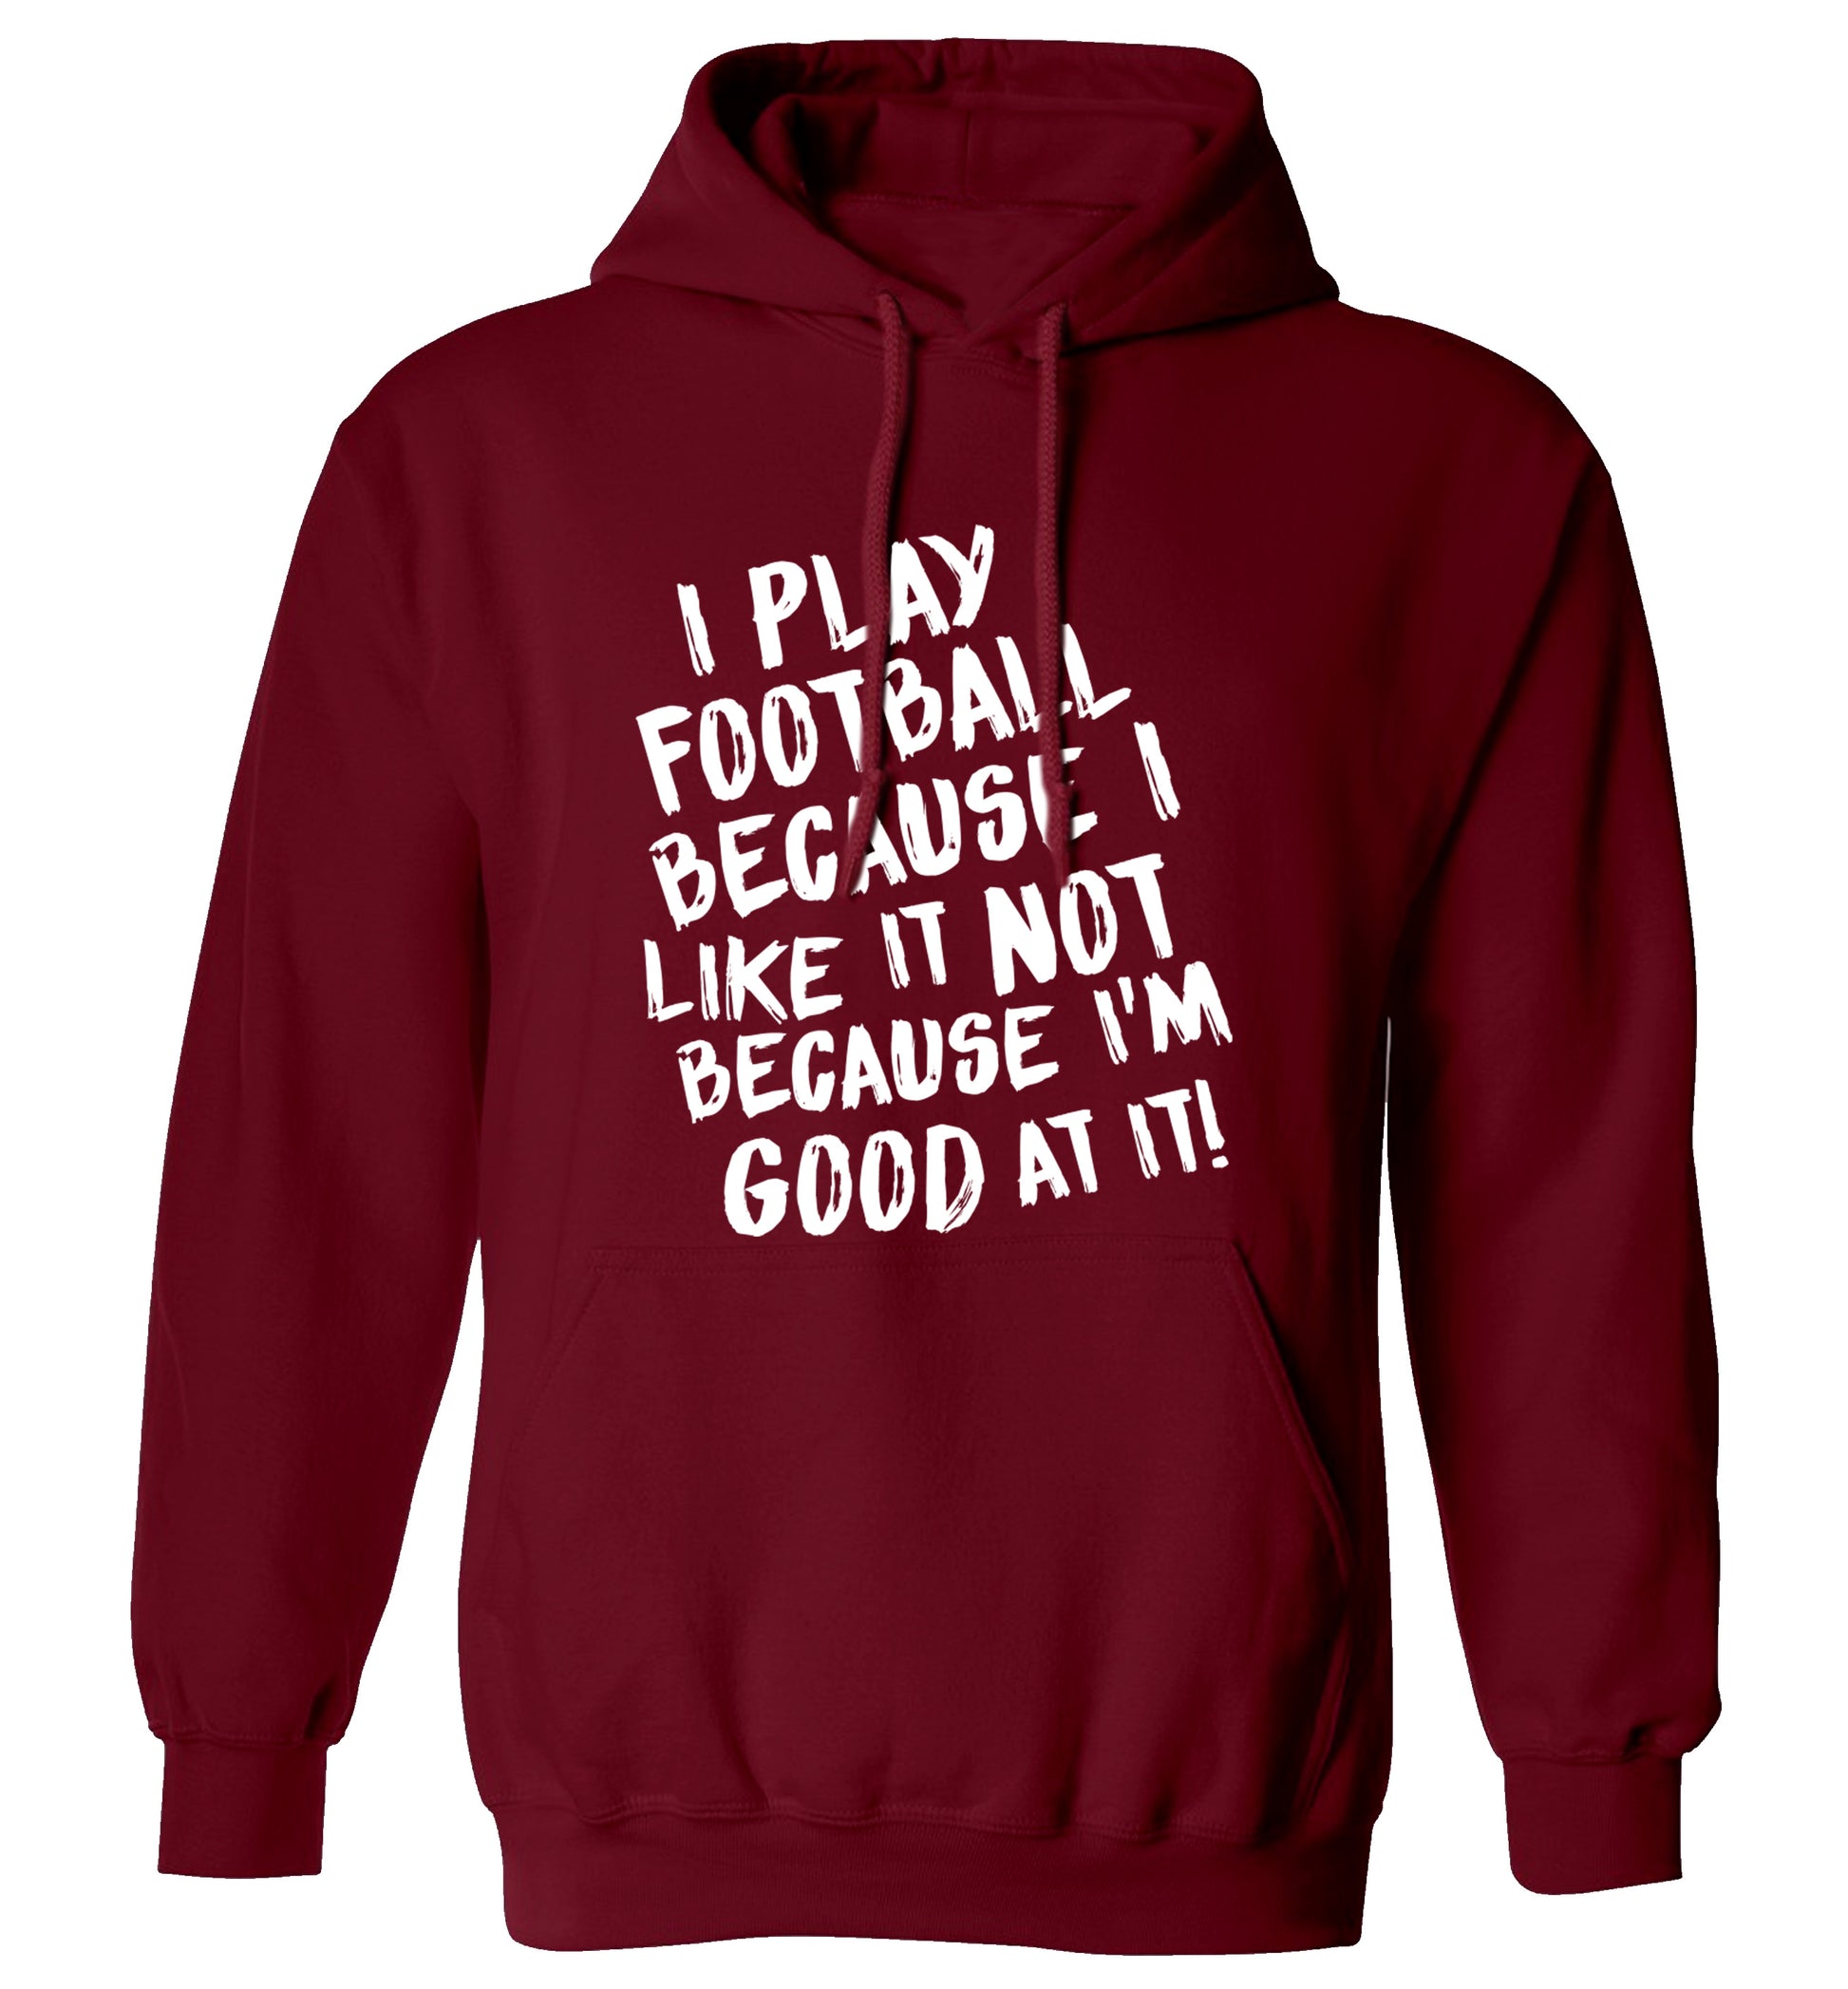 I play football because I like it not because I'm good at it adults unisexmaroon hoodie 2XL